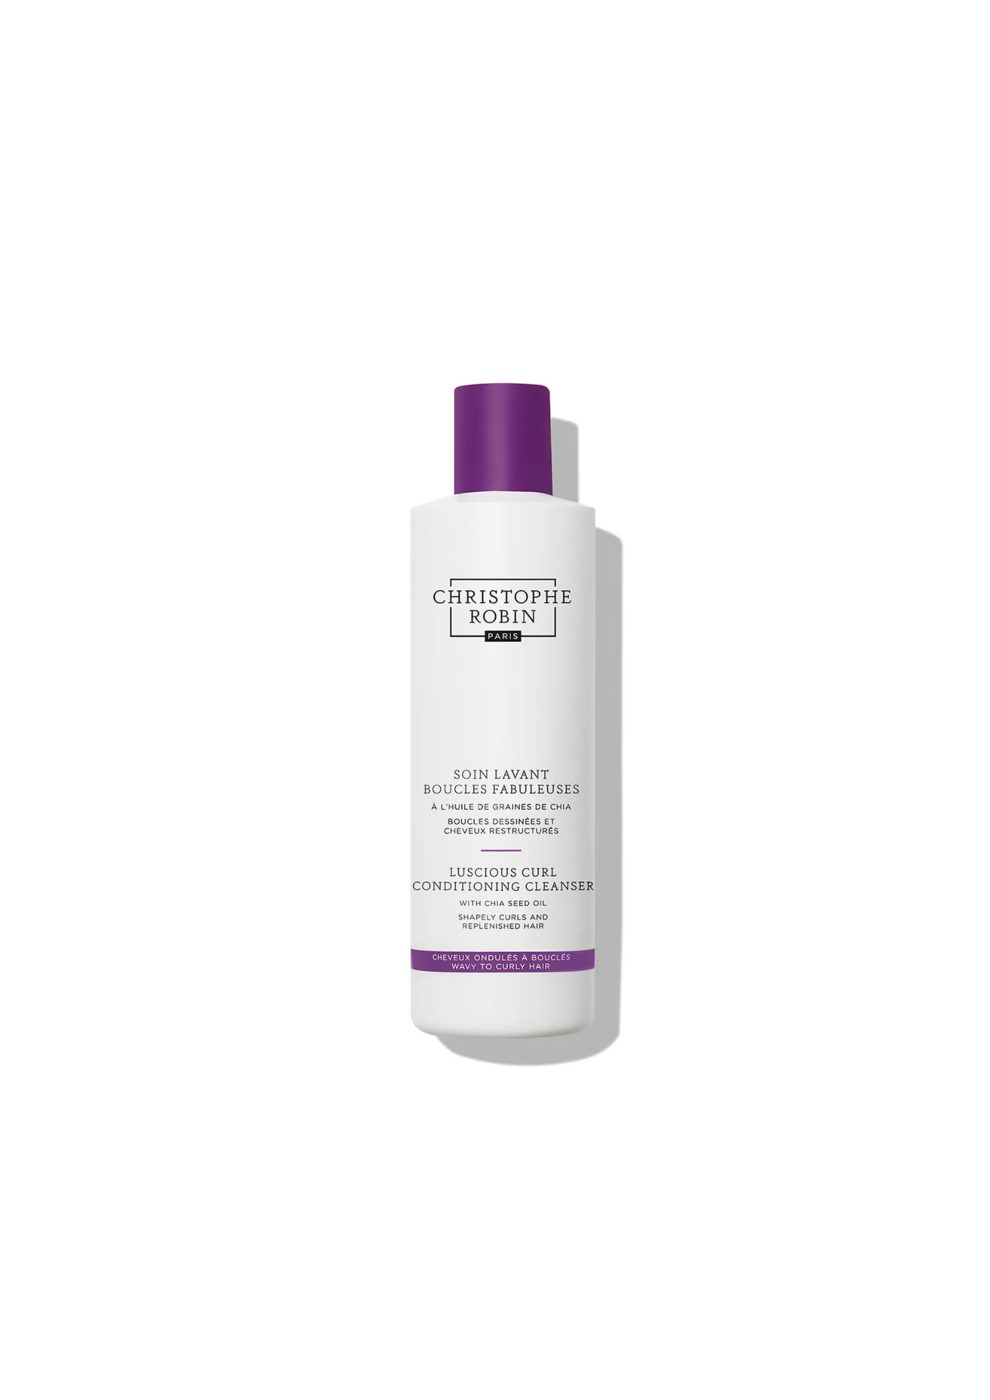 Luscious Curl Conditioning Cleanser, de Christophe Robin